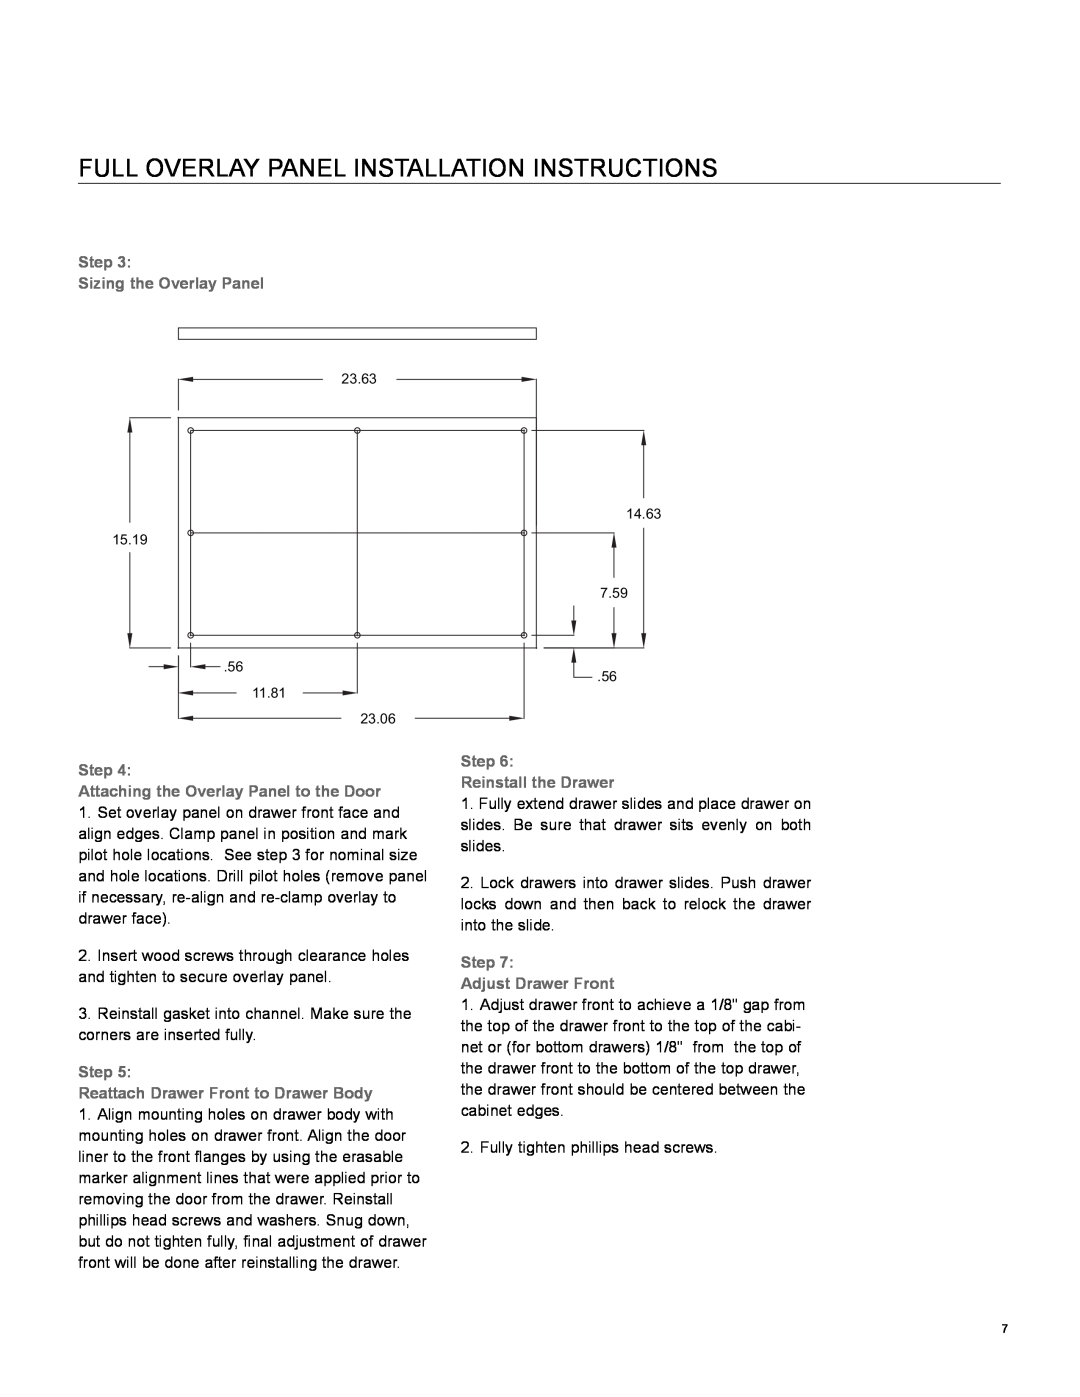 Marvel Industries 60RD manual Full Overlay Panel Installation Instructions, Step Sizing the Overlay Panel 